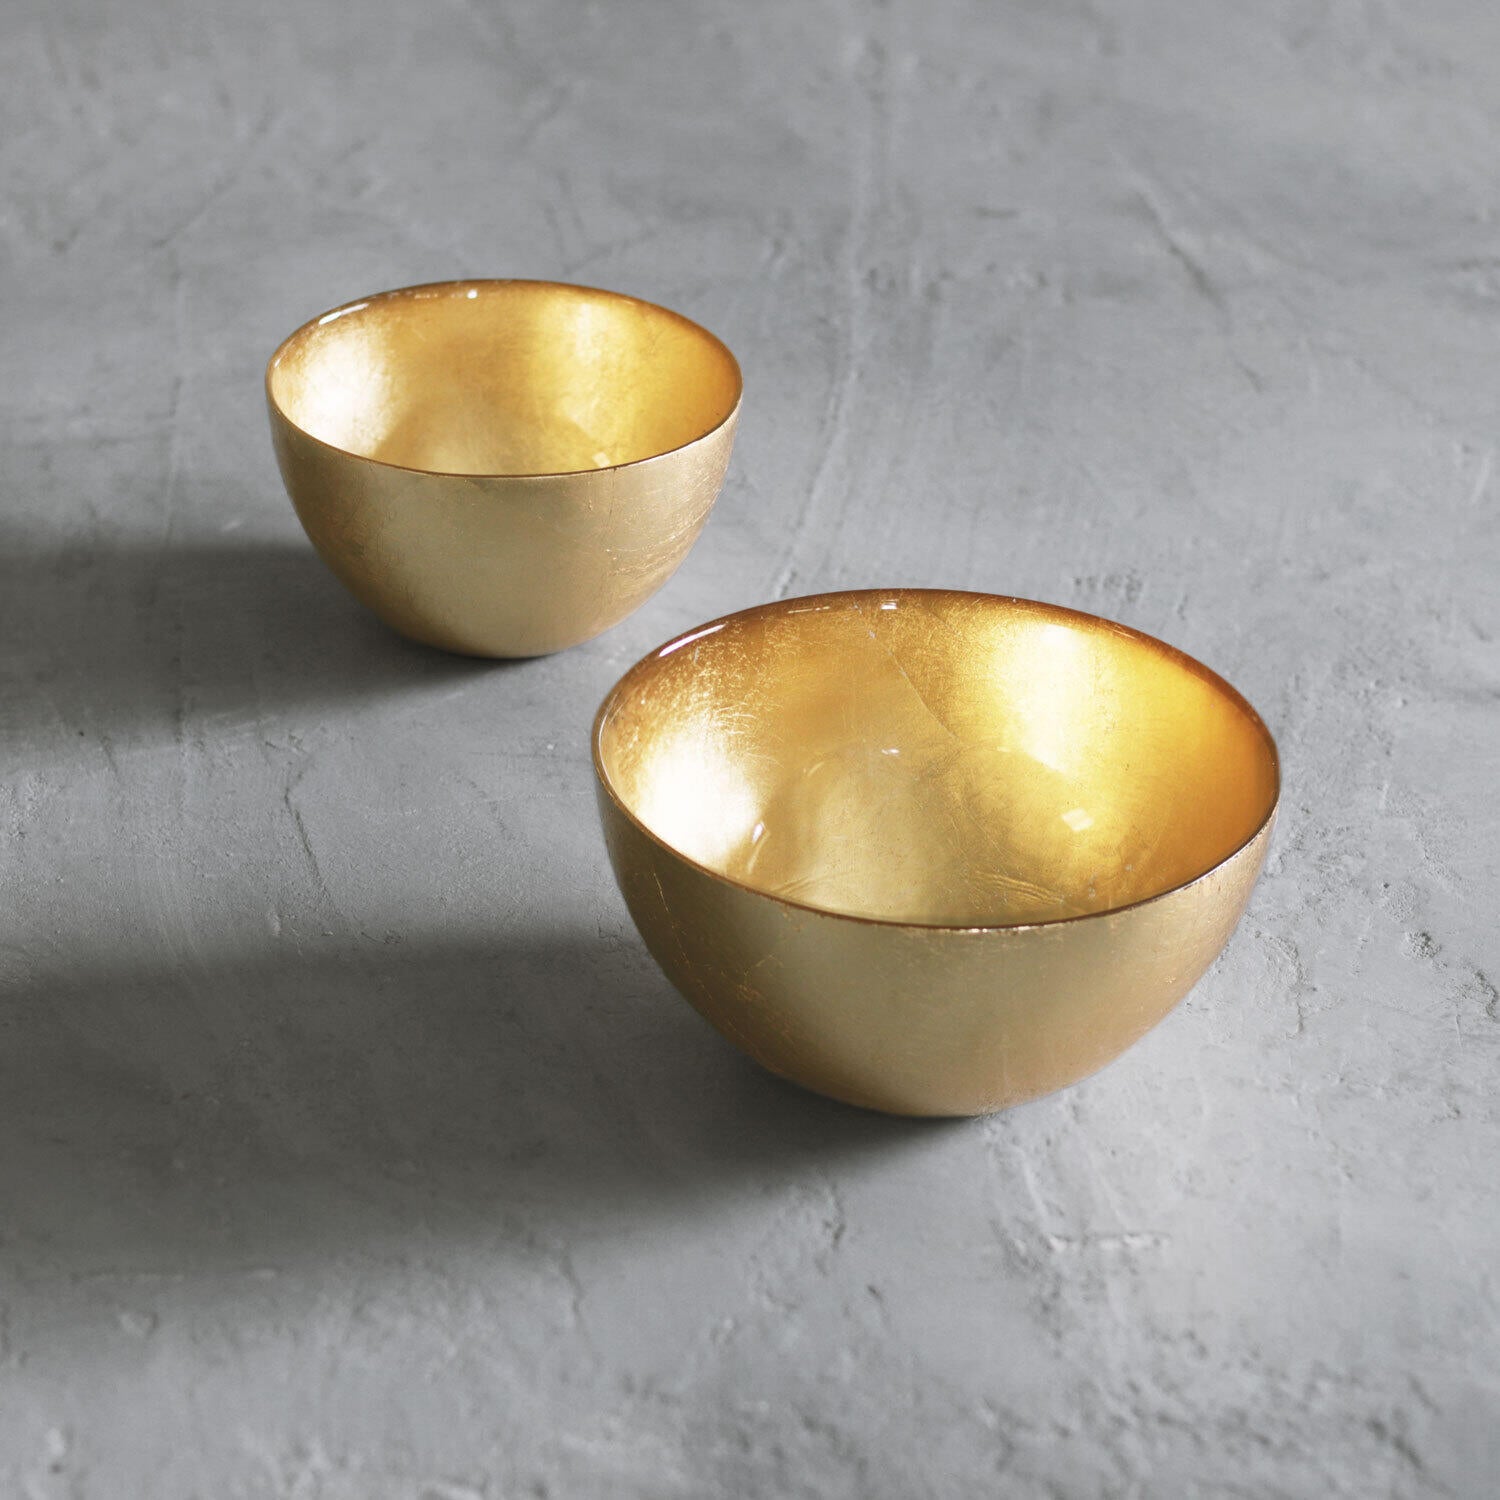 GLASS New Orleans Round Foil Leafing Bowl Set of 2 (Gold)